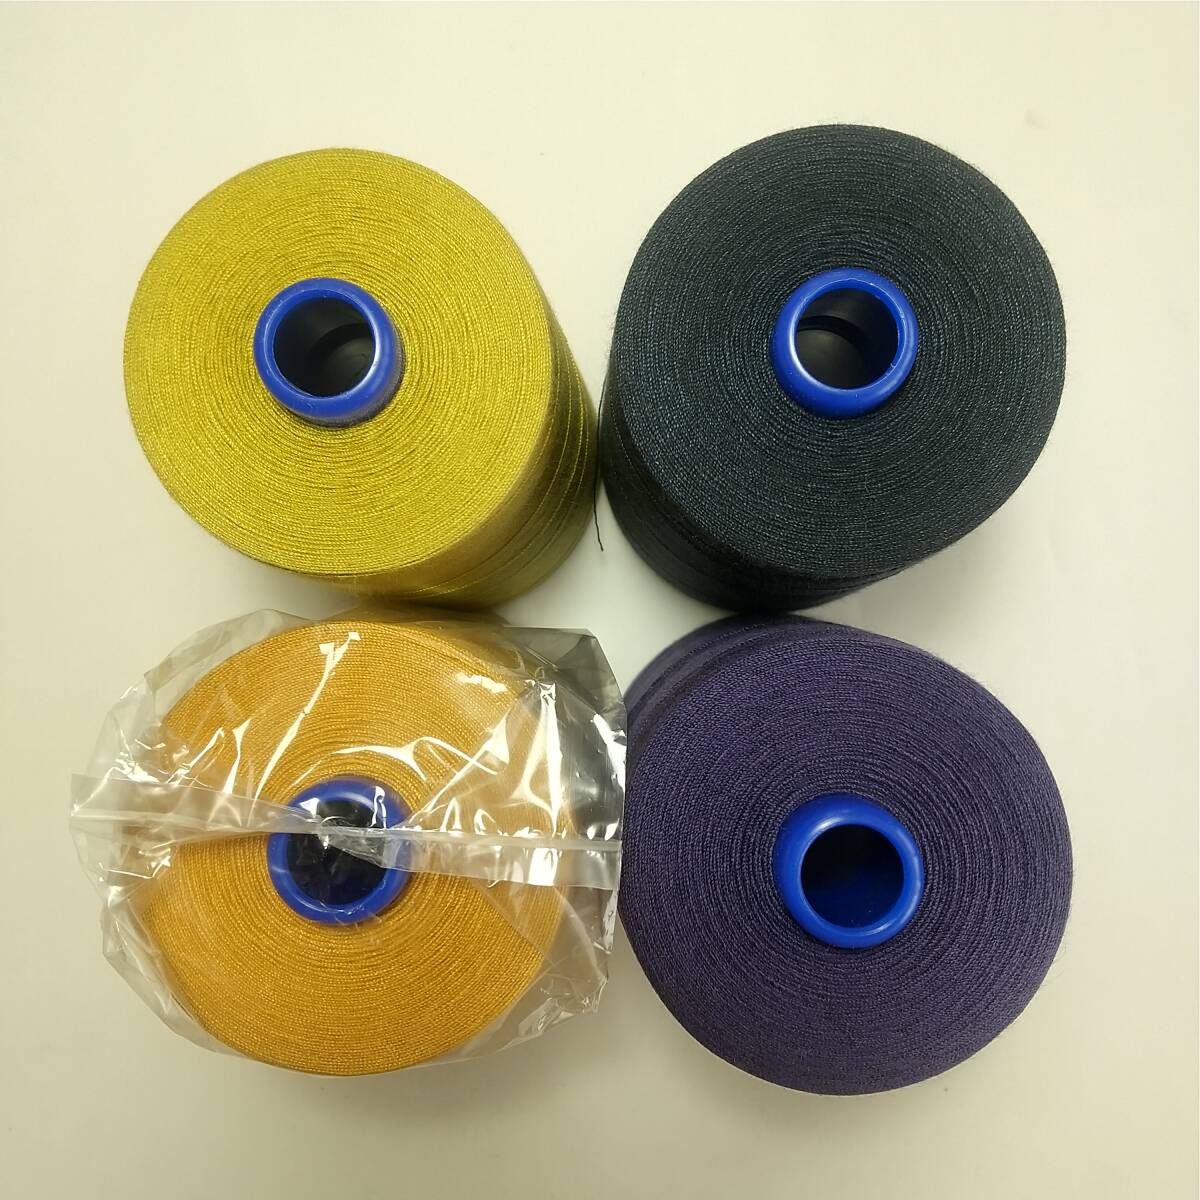  industry sewing-cotton / many remainder /#30/ core / futoshi count /4 color 4ps.@/ Denim / leather / thickness / tube H34